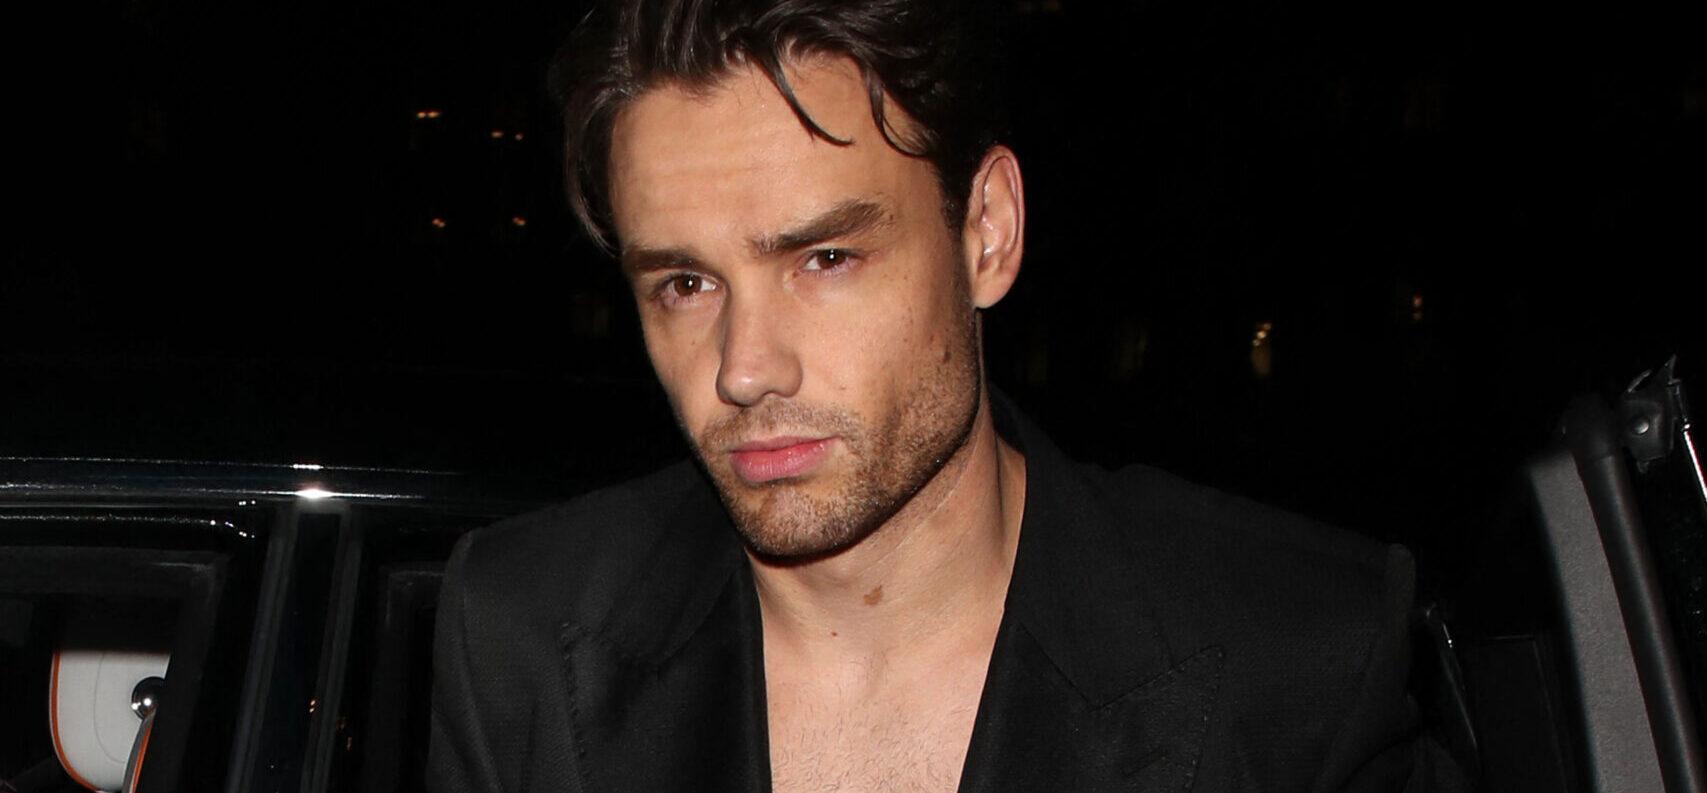 Liam Payne Declares He’s ‘Back’ After Secret Rehab Stay